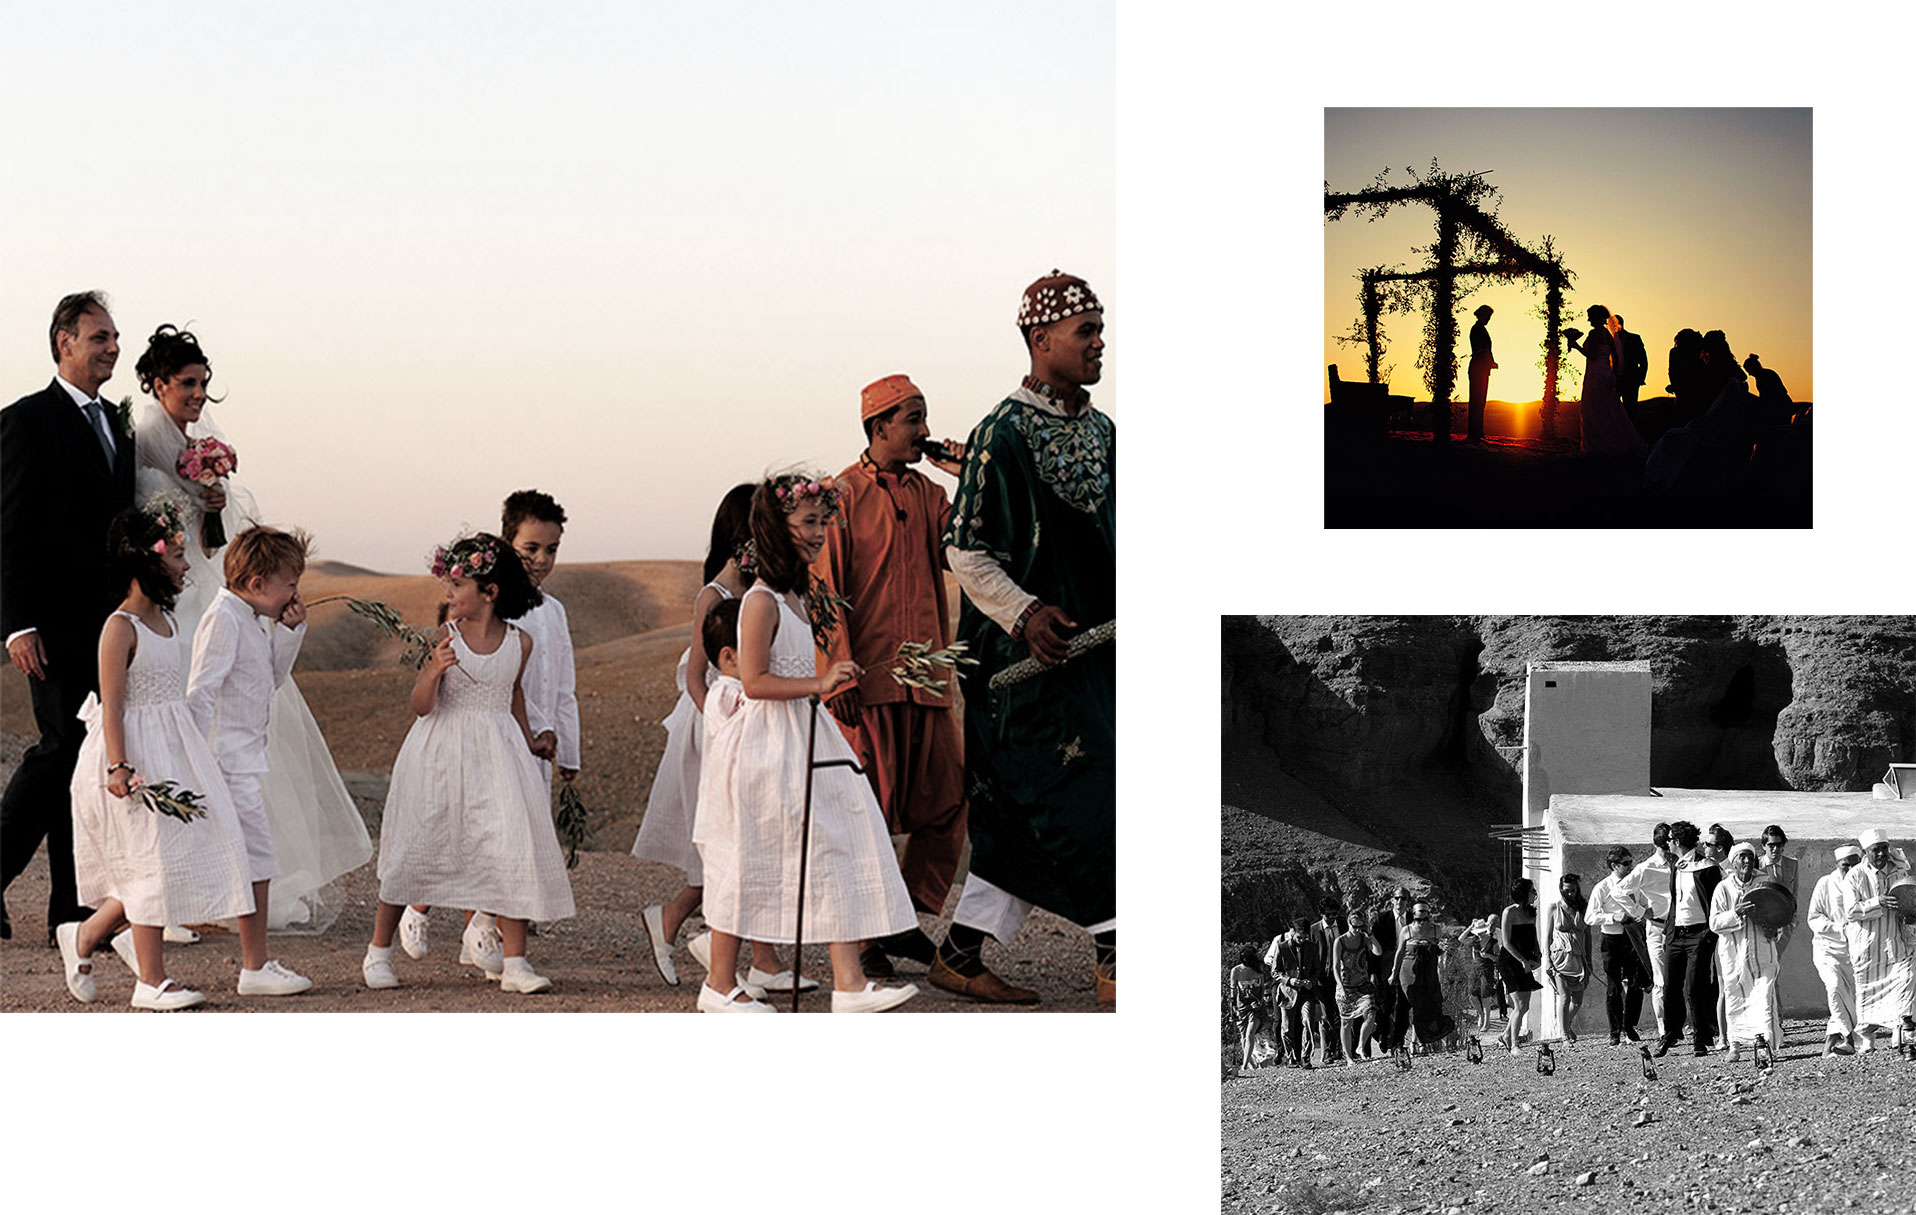 Children, Photographers and Musicians in a catered luxury Moroccan style wedding – La Pause, Morocco